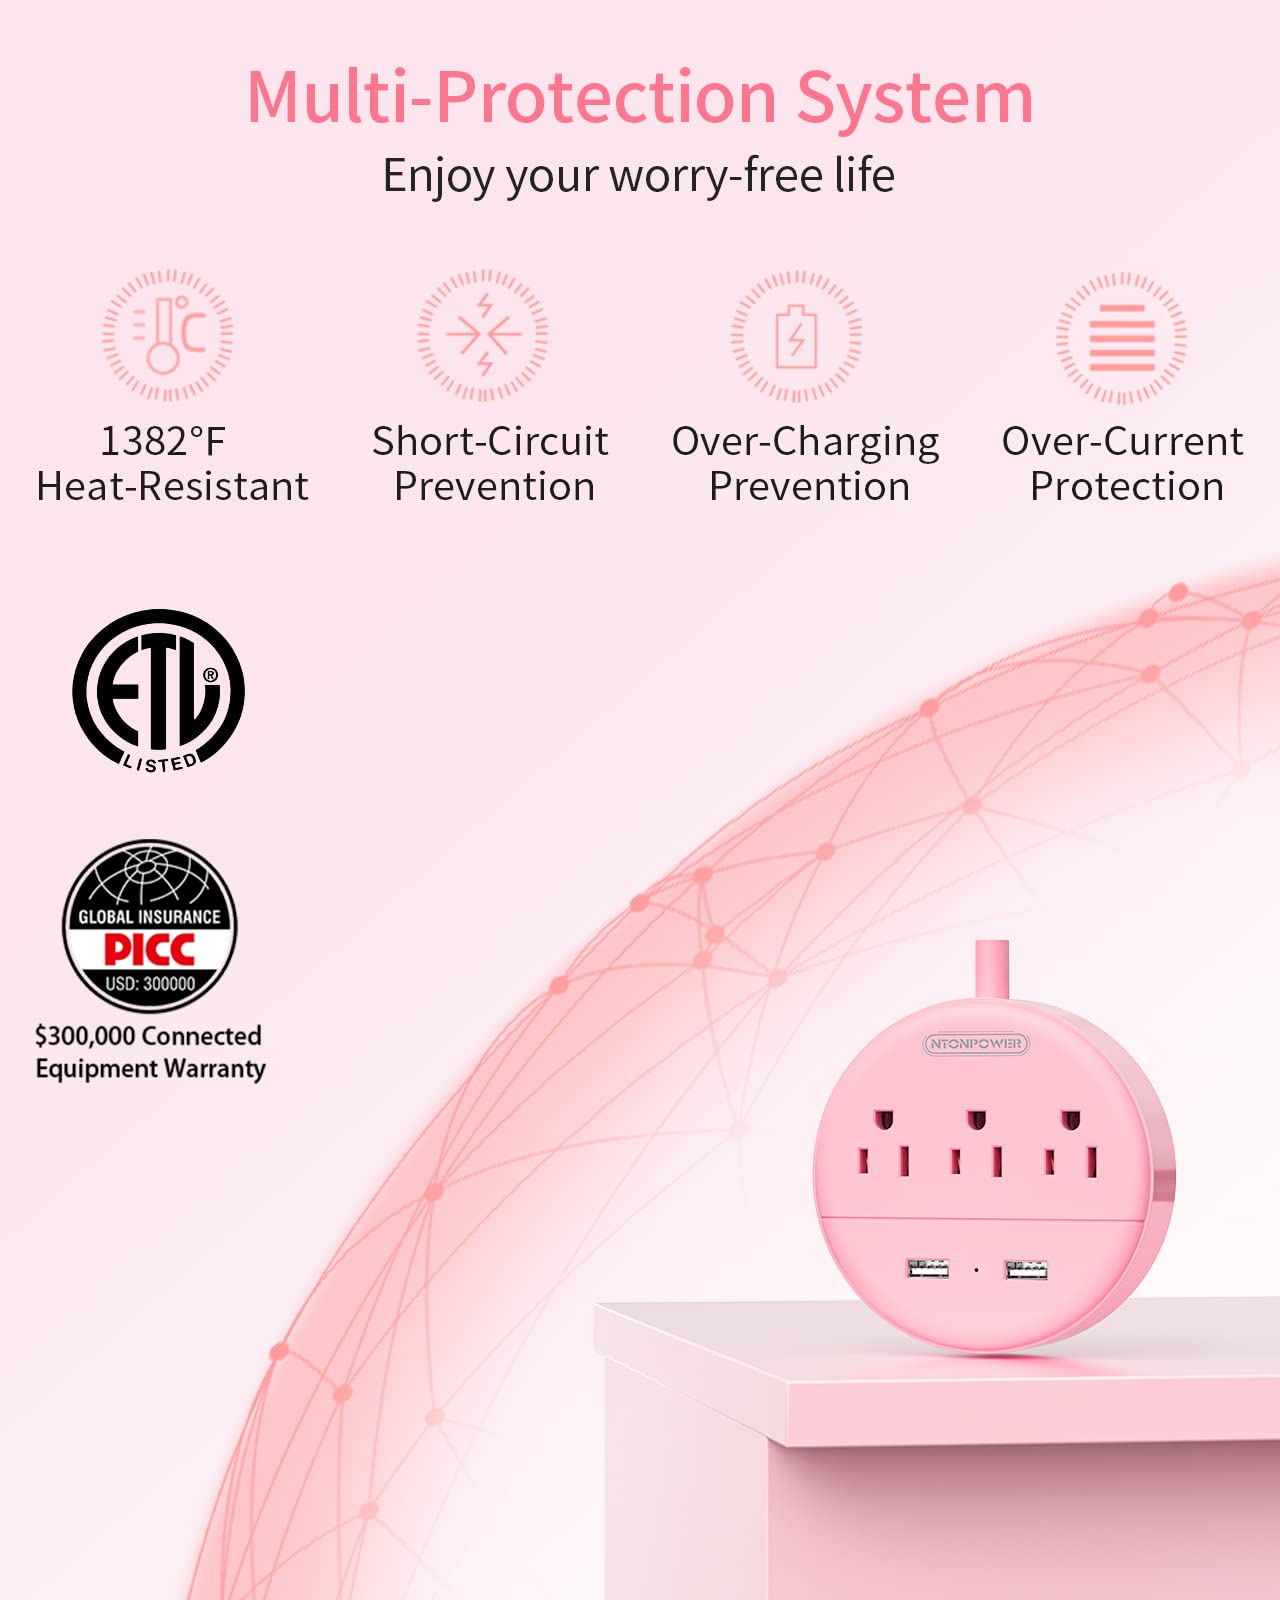 Pink Power Strip with USB, NTONPOWER Flat Plug Extension Cord 5ft, Nightstand Desktop Charging Station with 3 Outlet and 2 USB, Wall Mount, Small Size for Dorm Room Home Office Travel, ETL Listed